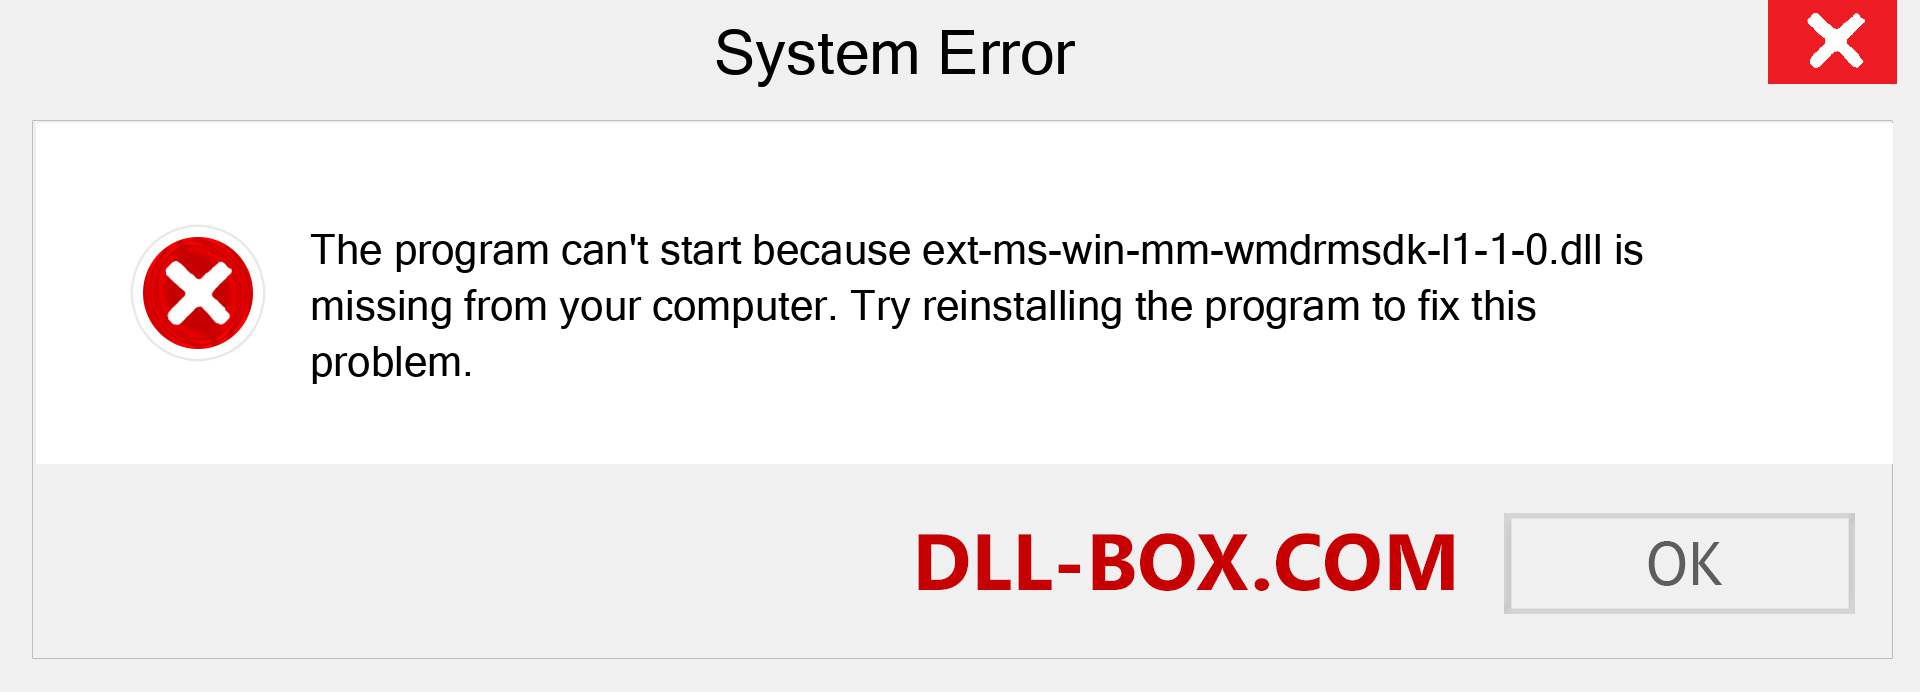  ext-ms-win-mm-wmdrmsdk-l1-1-0.dll file is missing?. Download for Windows 7, 8, 10 - Fix  ext-ms-win-mm-wmdrmsdk-l1-1-0 dll Missing Error on Windows, photos, images